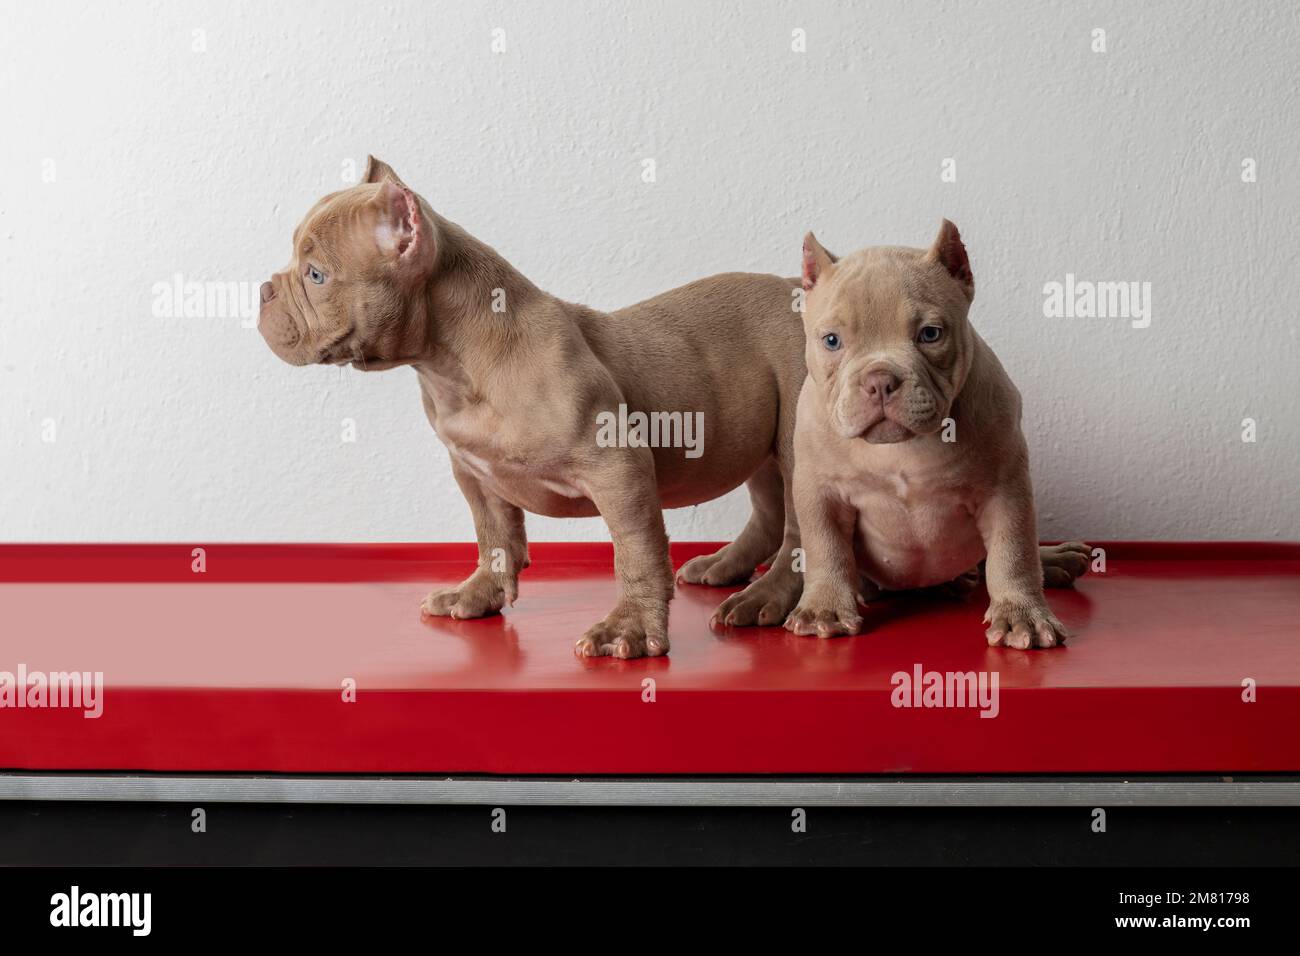 two american bully puppy dogs, on a red table with a white background. Stock Photo